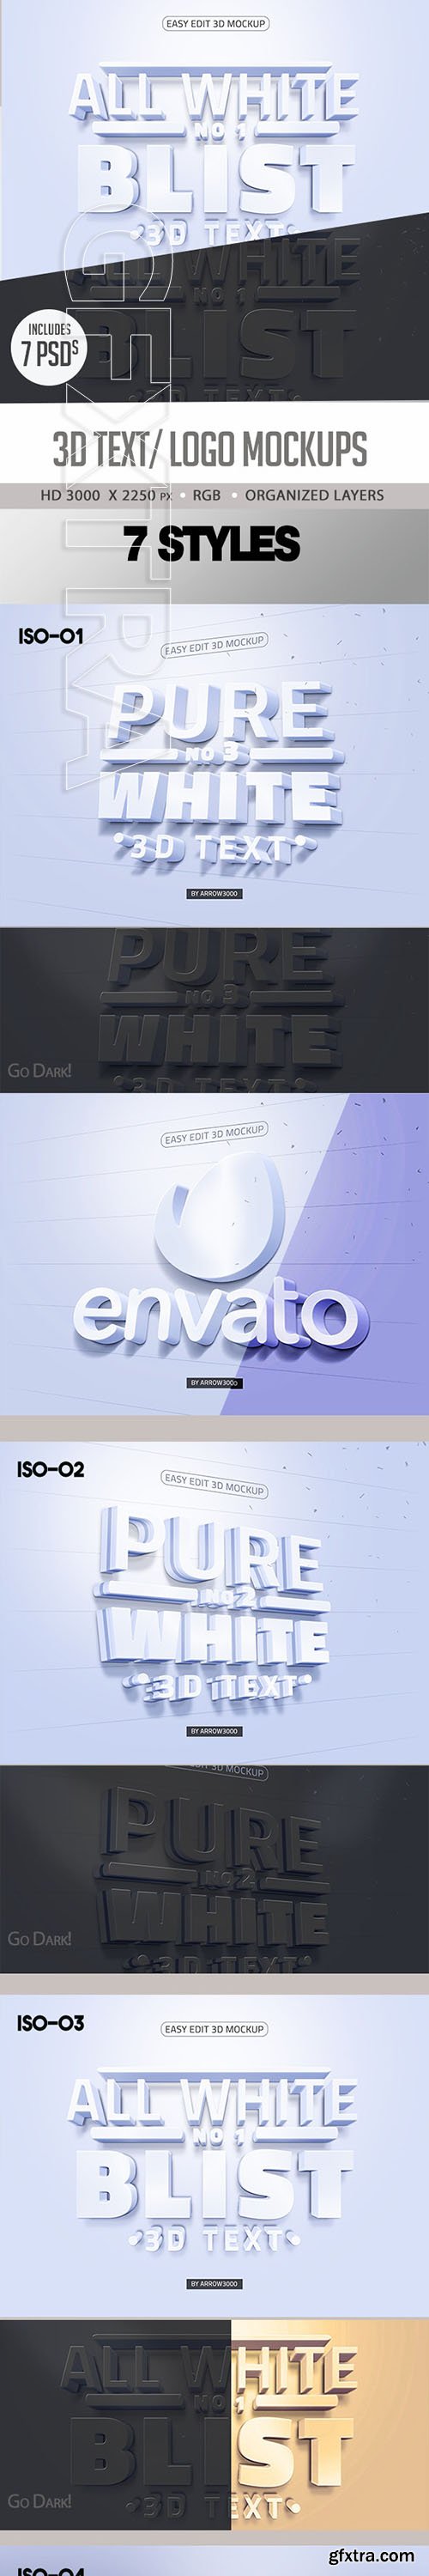 GraphicRiver - Pure White 3D Text Logo Mock up 23888803 » GFxtra